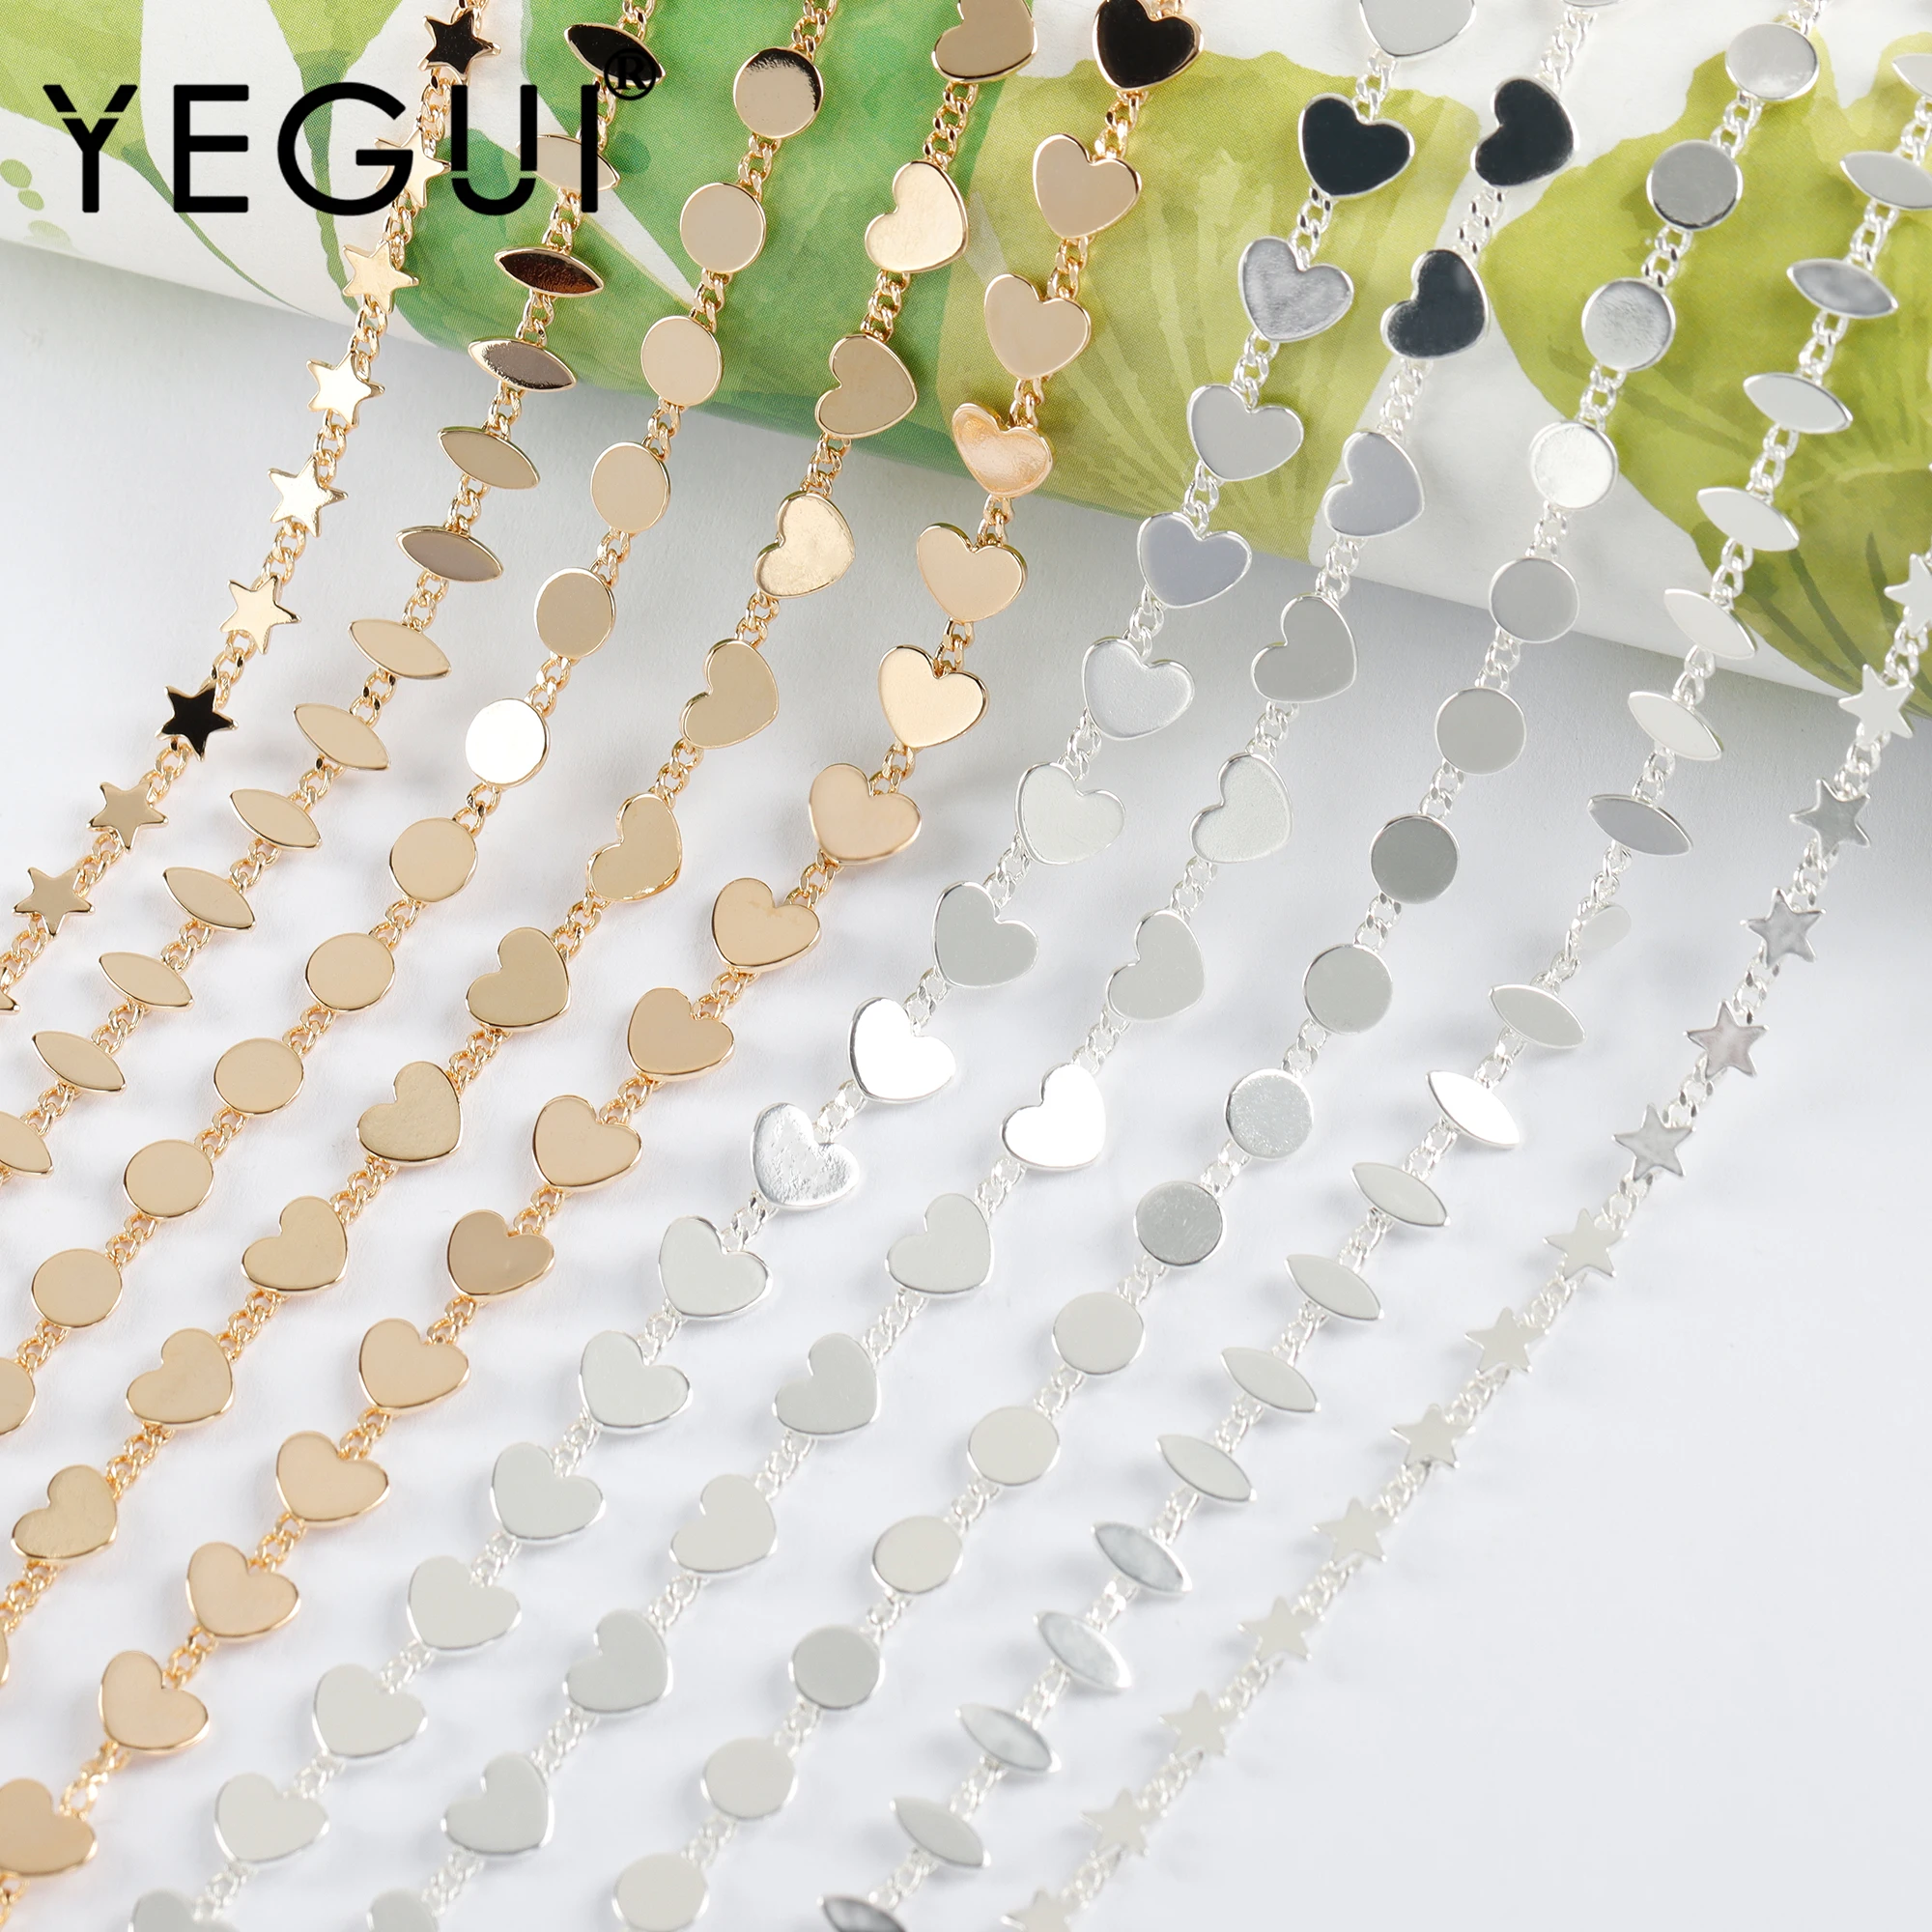 

YEGUI C222,diy chain,jewelry finding,18k gold plated,copper metal,rhodium plated,diy bracelet necklace,jewelry making,1m/lot